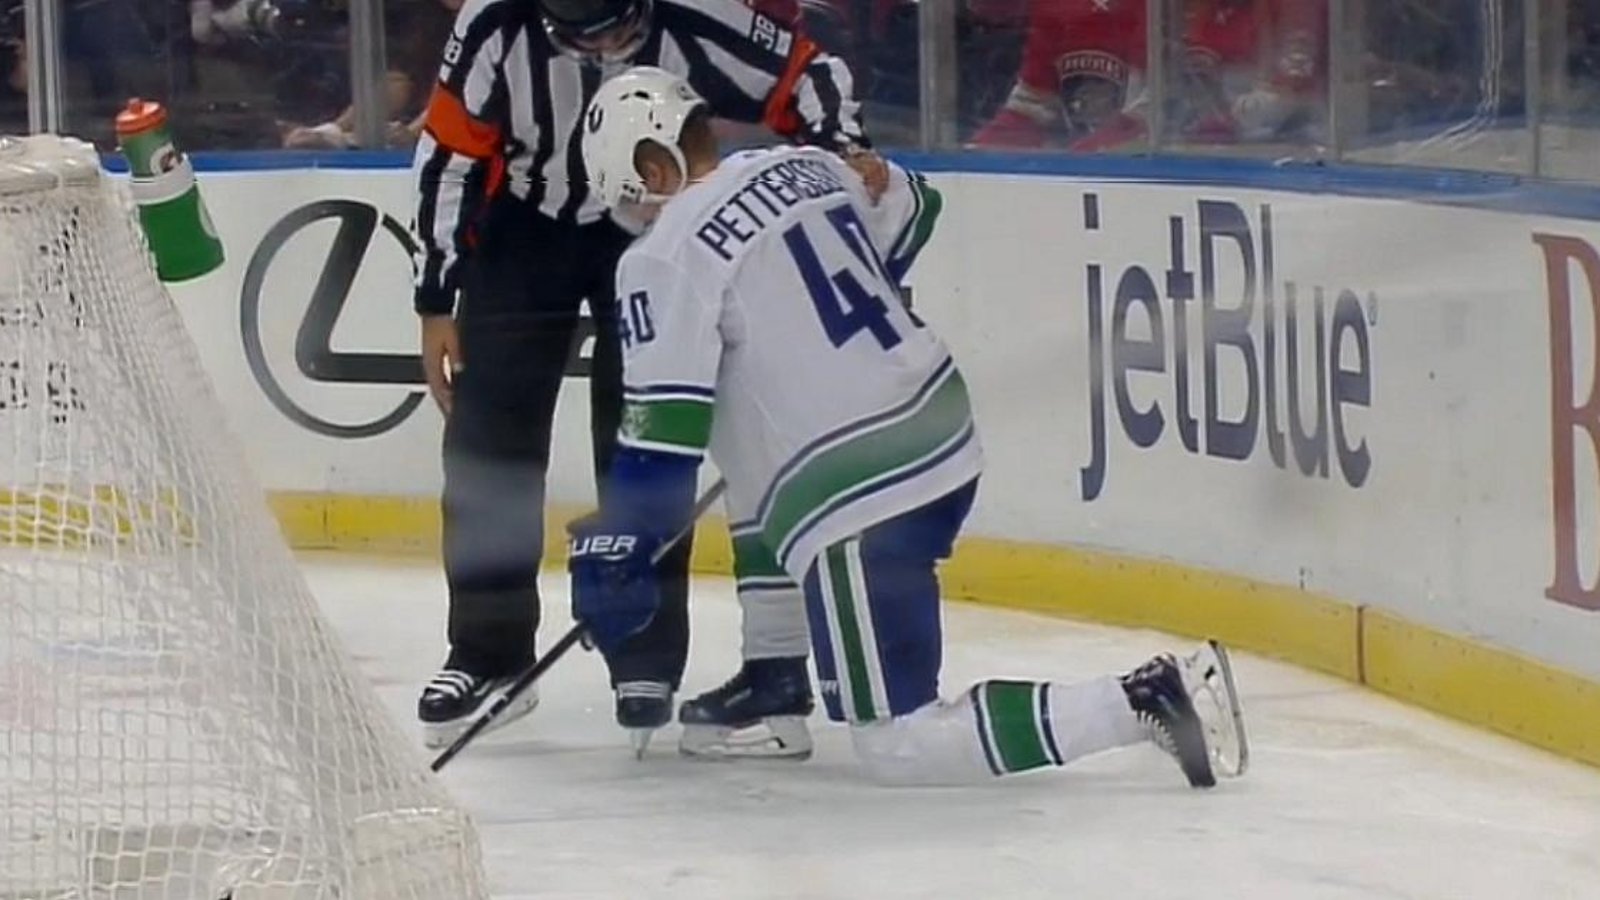 Petterson knocked out of the game after being slammed to the ice.